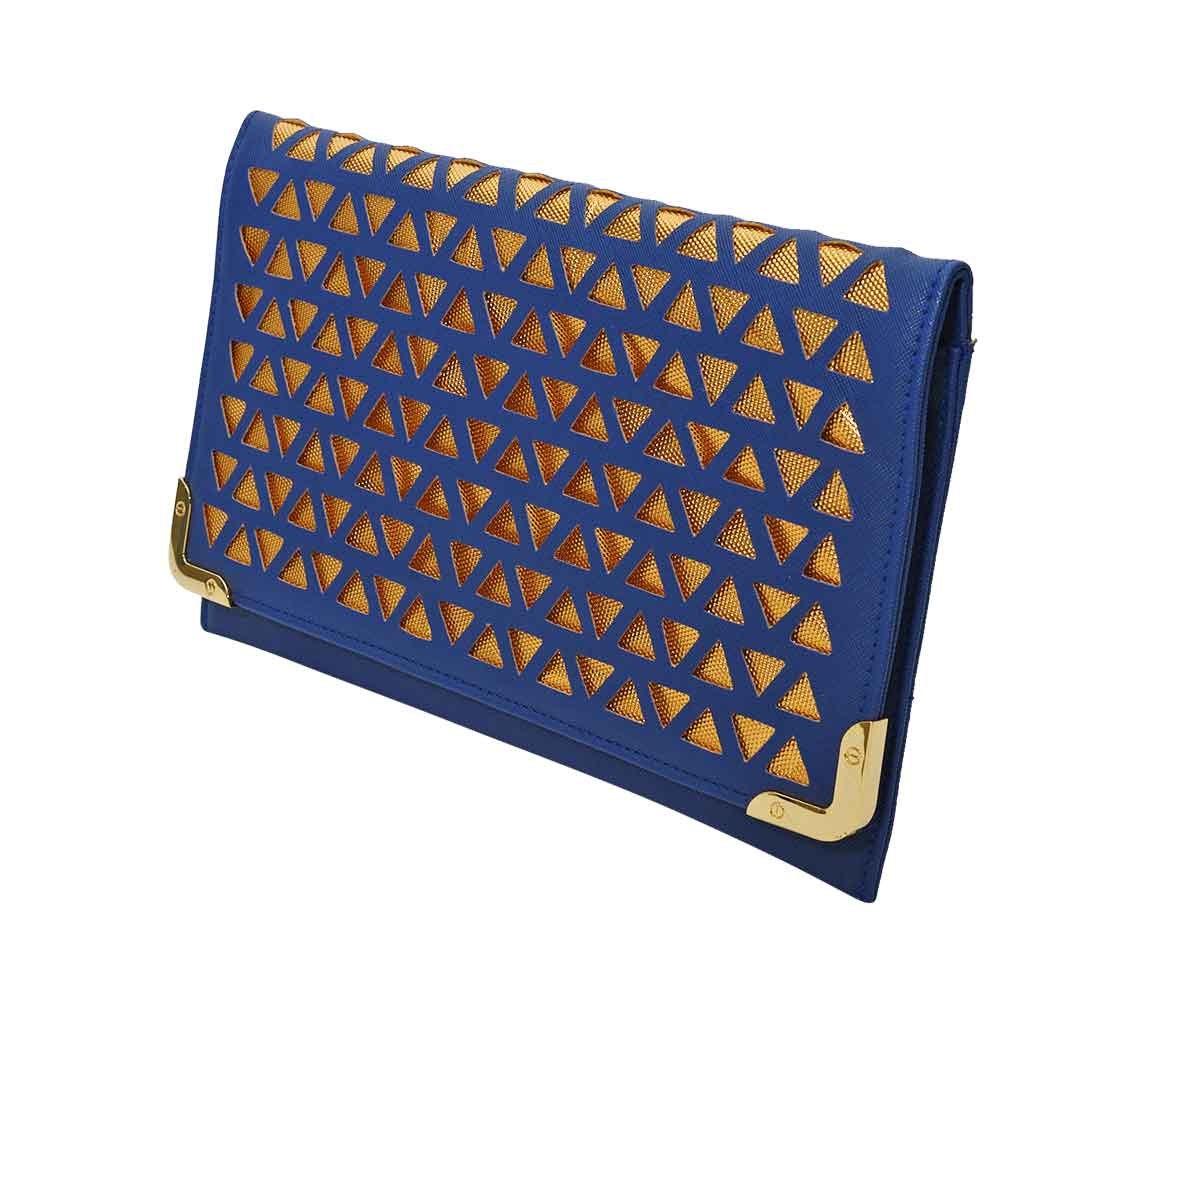 Nisha bag Faux leather Navy blue and gold pochette with chain strap. Hook on strap for multiple positions. Rani collection by Veronica Tharmalingam. Side view of the slim pouche